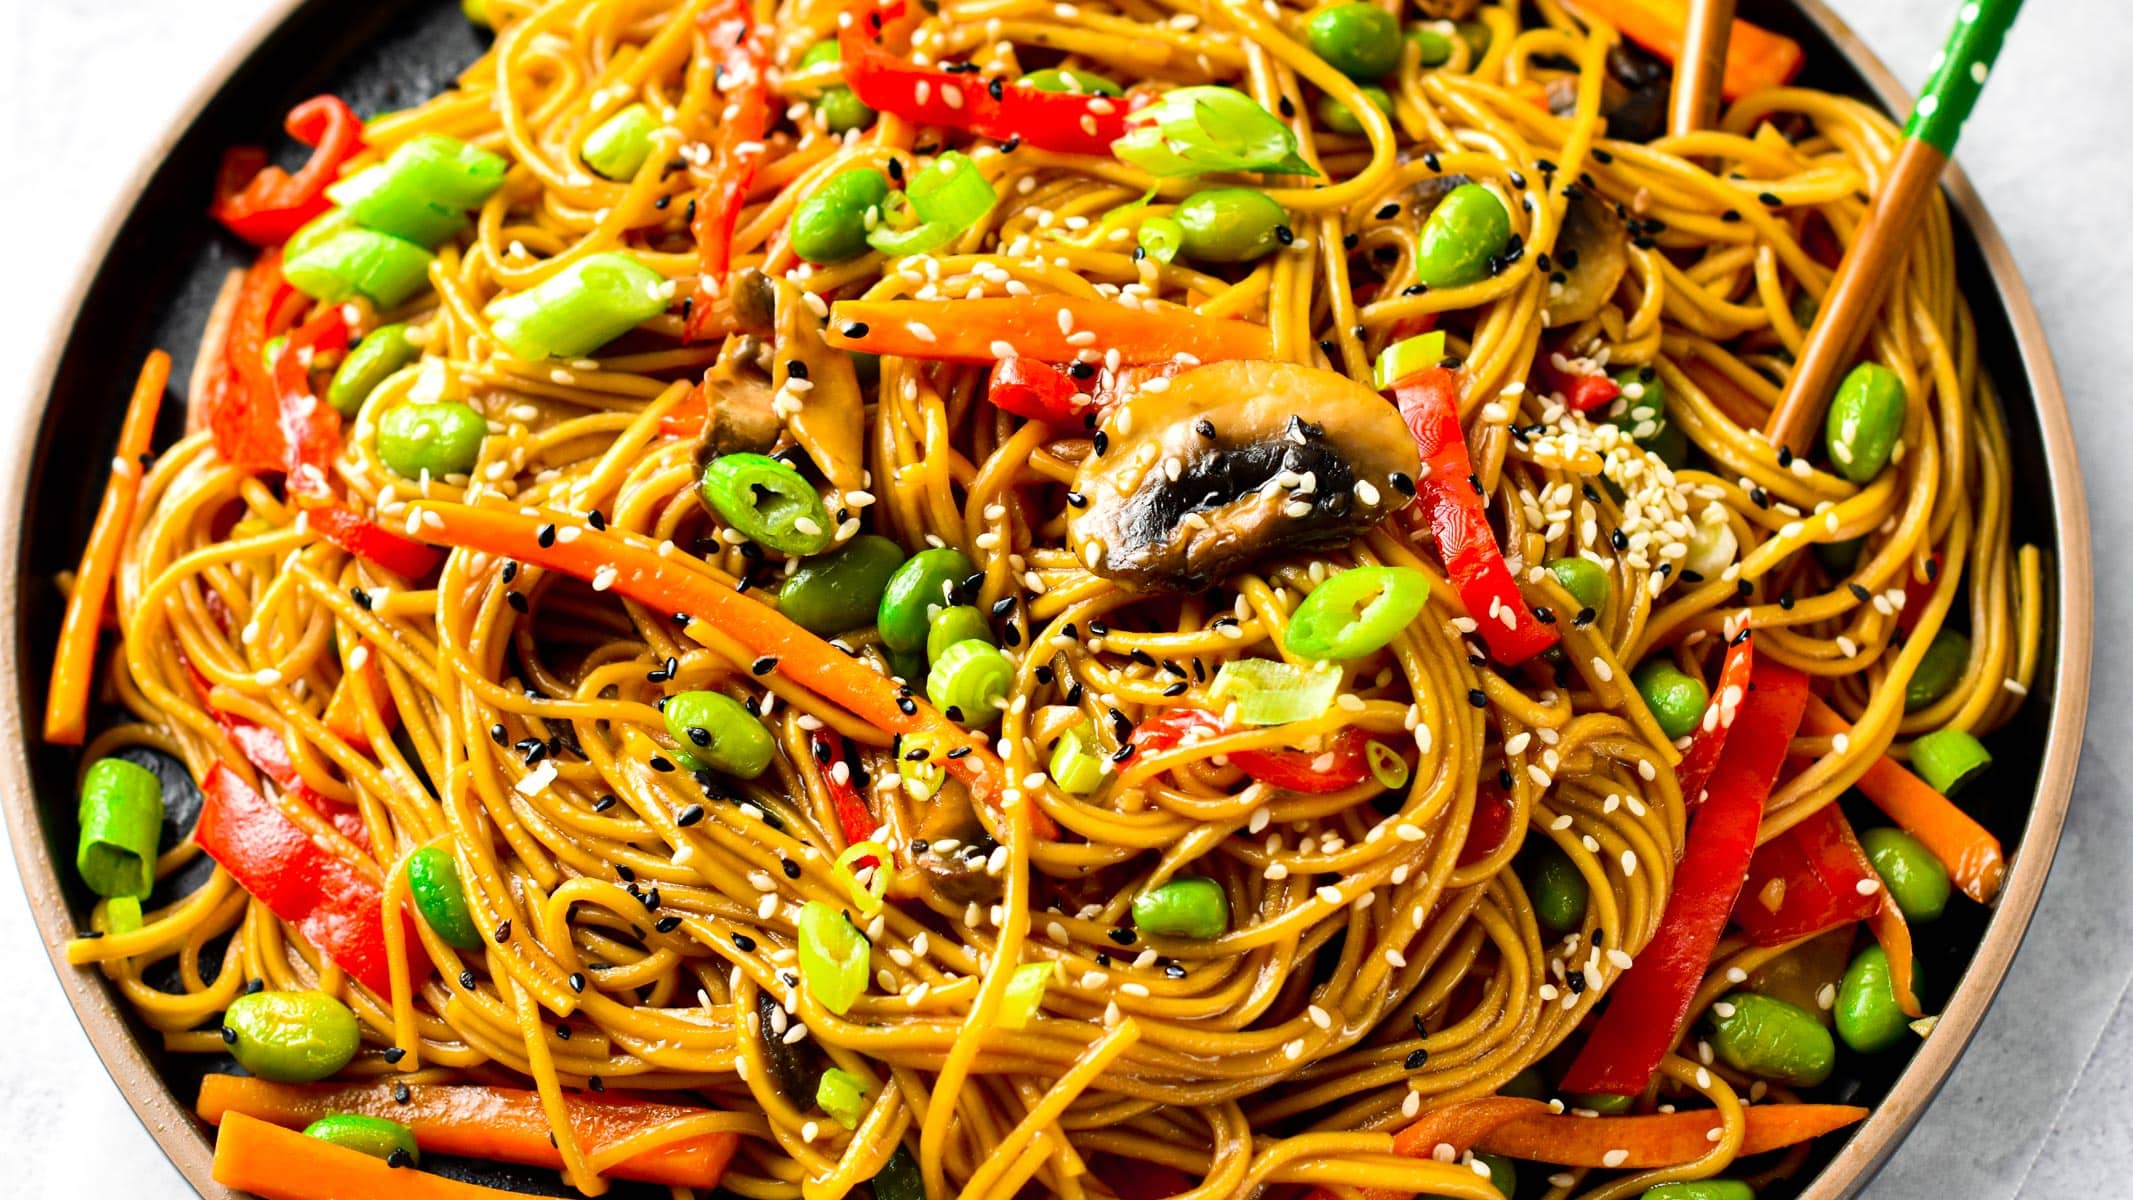 These teriyaki noodles are easy 20 minutes Japanese ramen noodles cooked in a lightly sweet teriyaki sauce with crunchy vegetables. Plus, this noodle recipe is also vegan-approved.